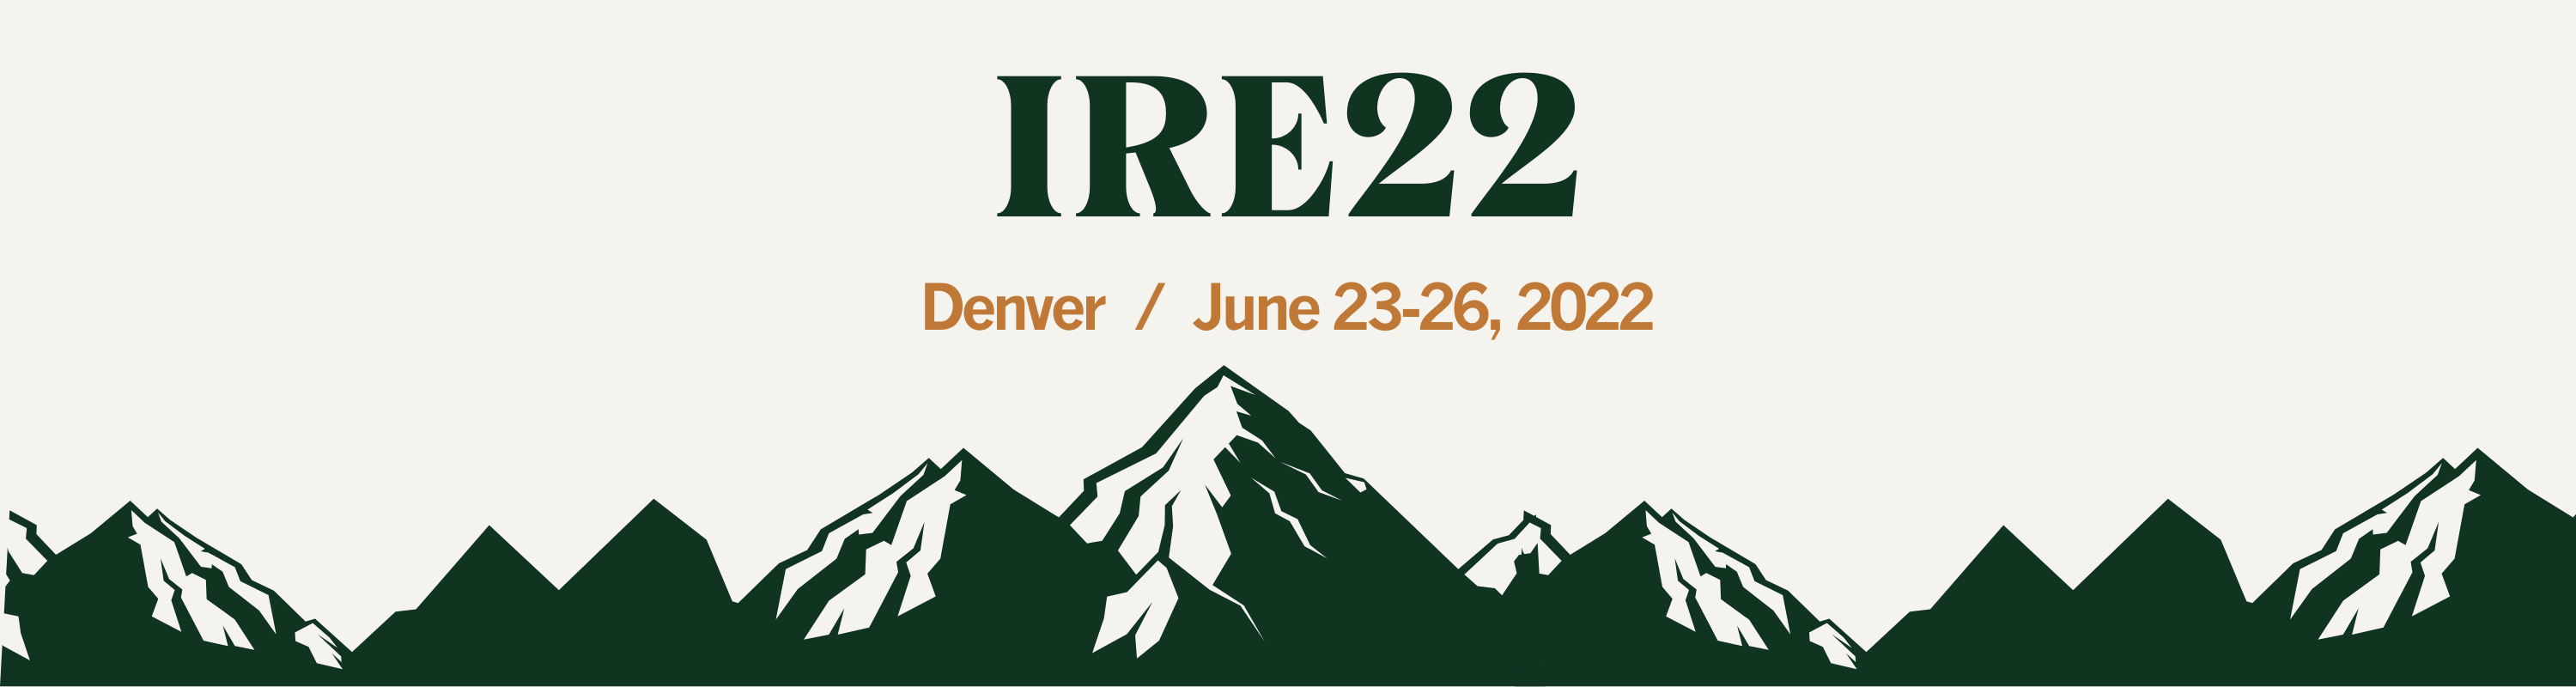 IRE 2022 in-person conference logo